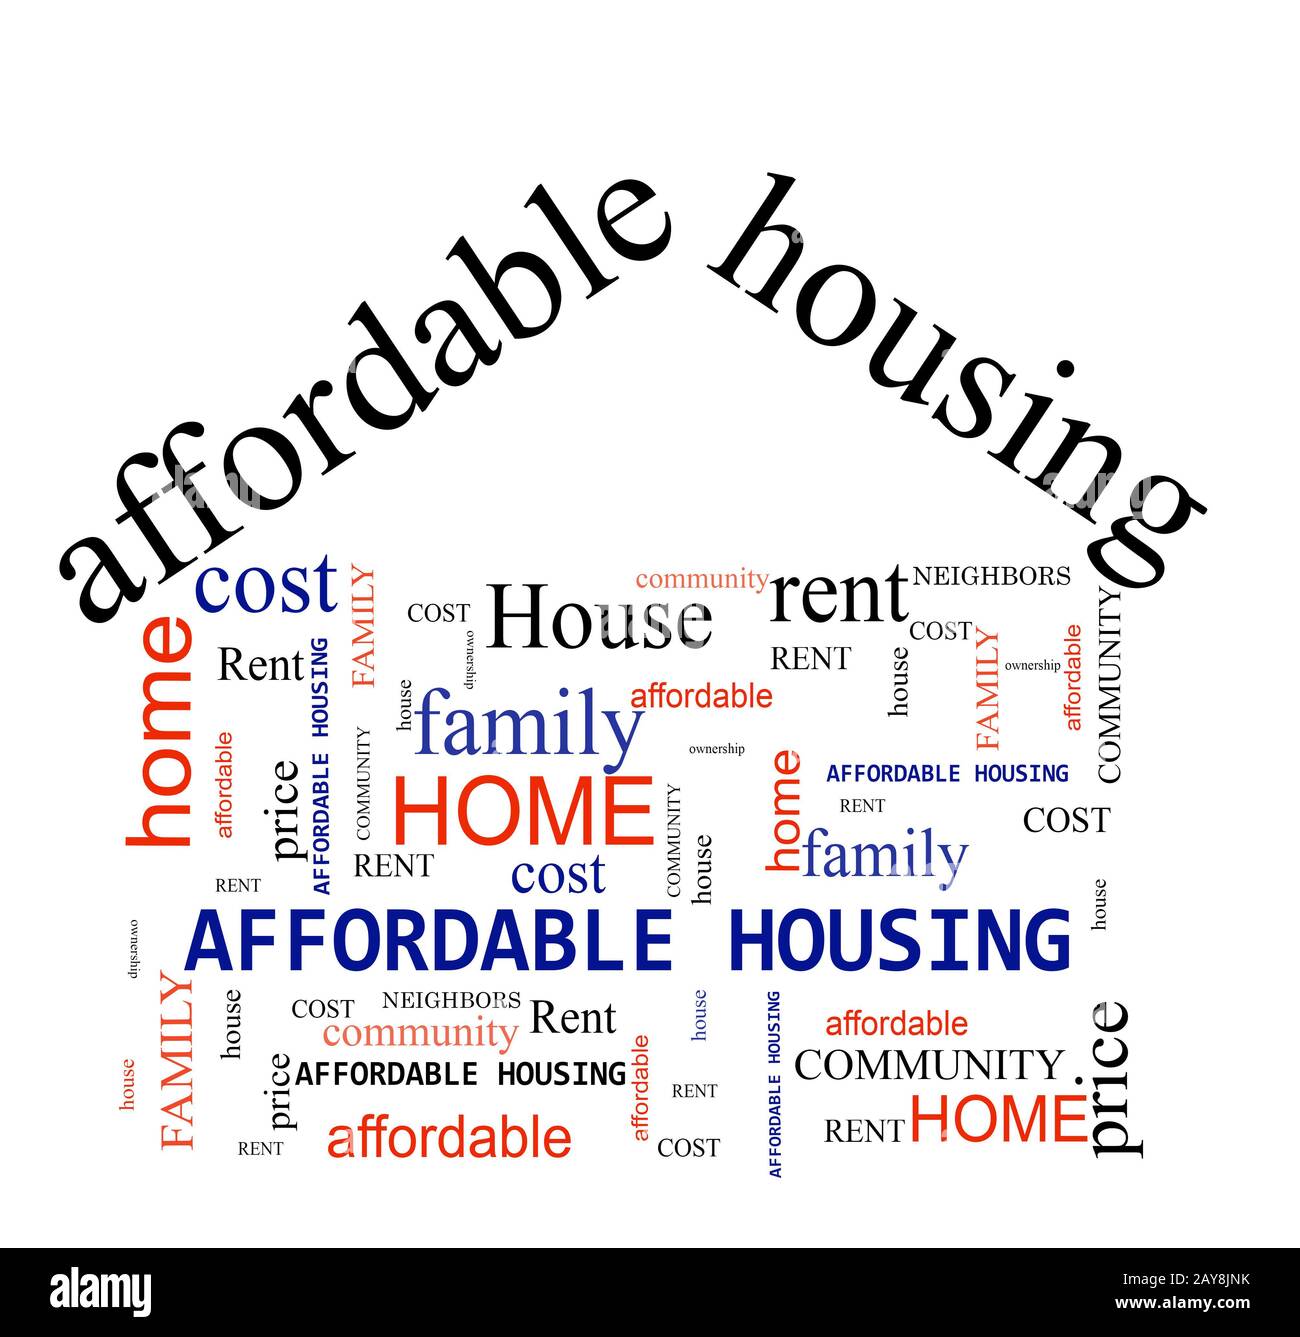 Affordable Housing concept Stock Photo